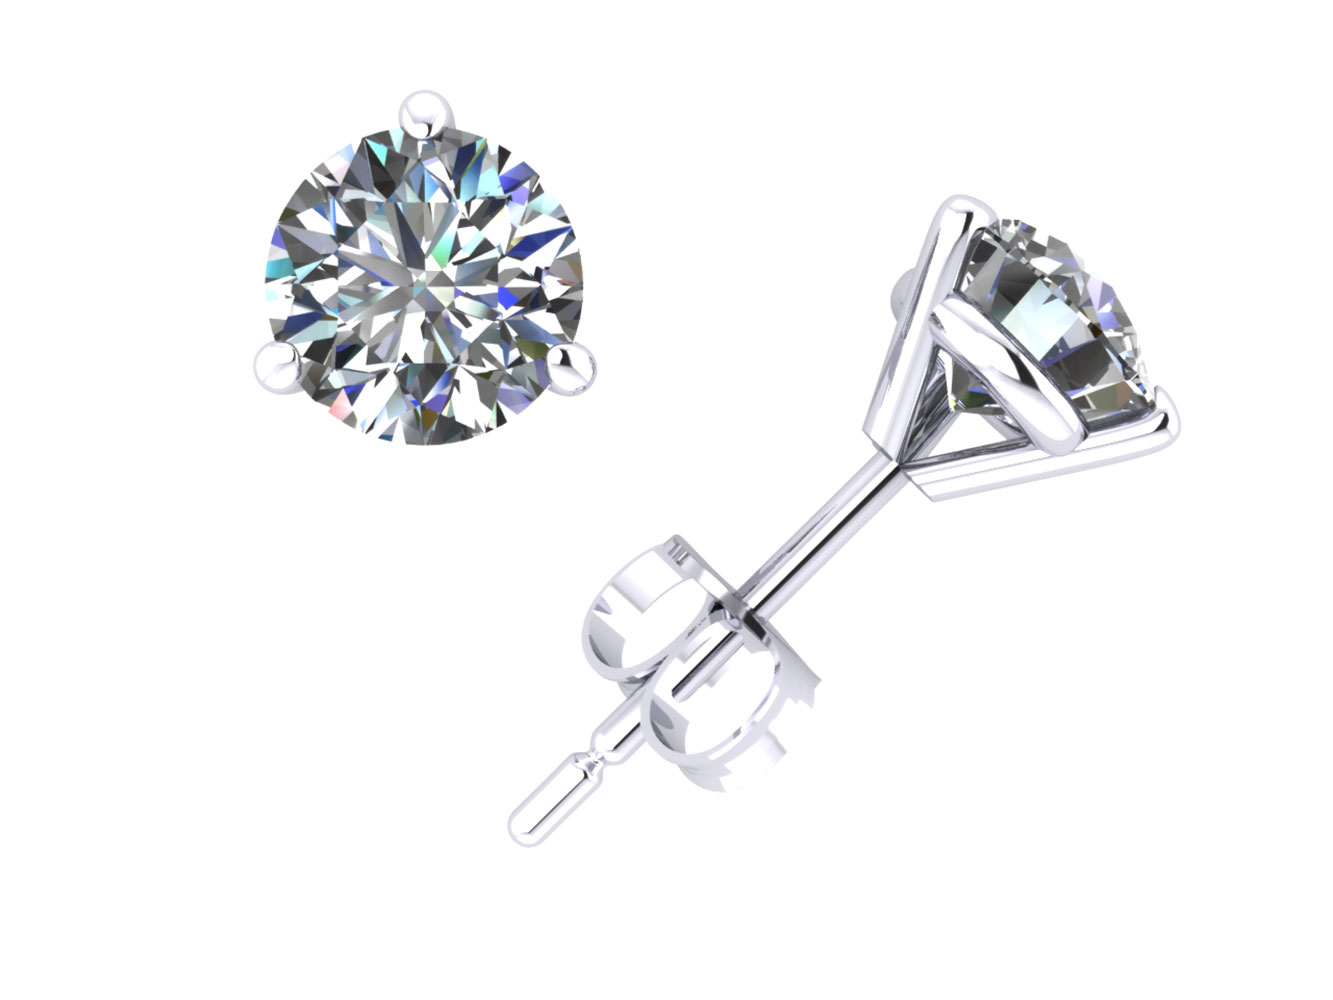 Jewel We Sell 0.50Carat Round Cut Diamond Martini Solitaire Stud Earrings 14k White or Yellow Gold Prong K I2